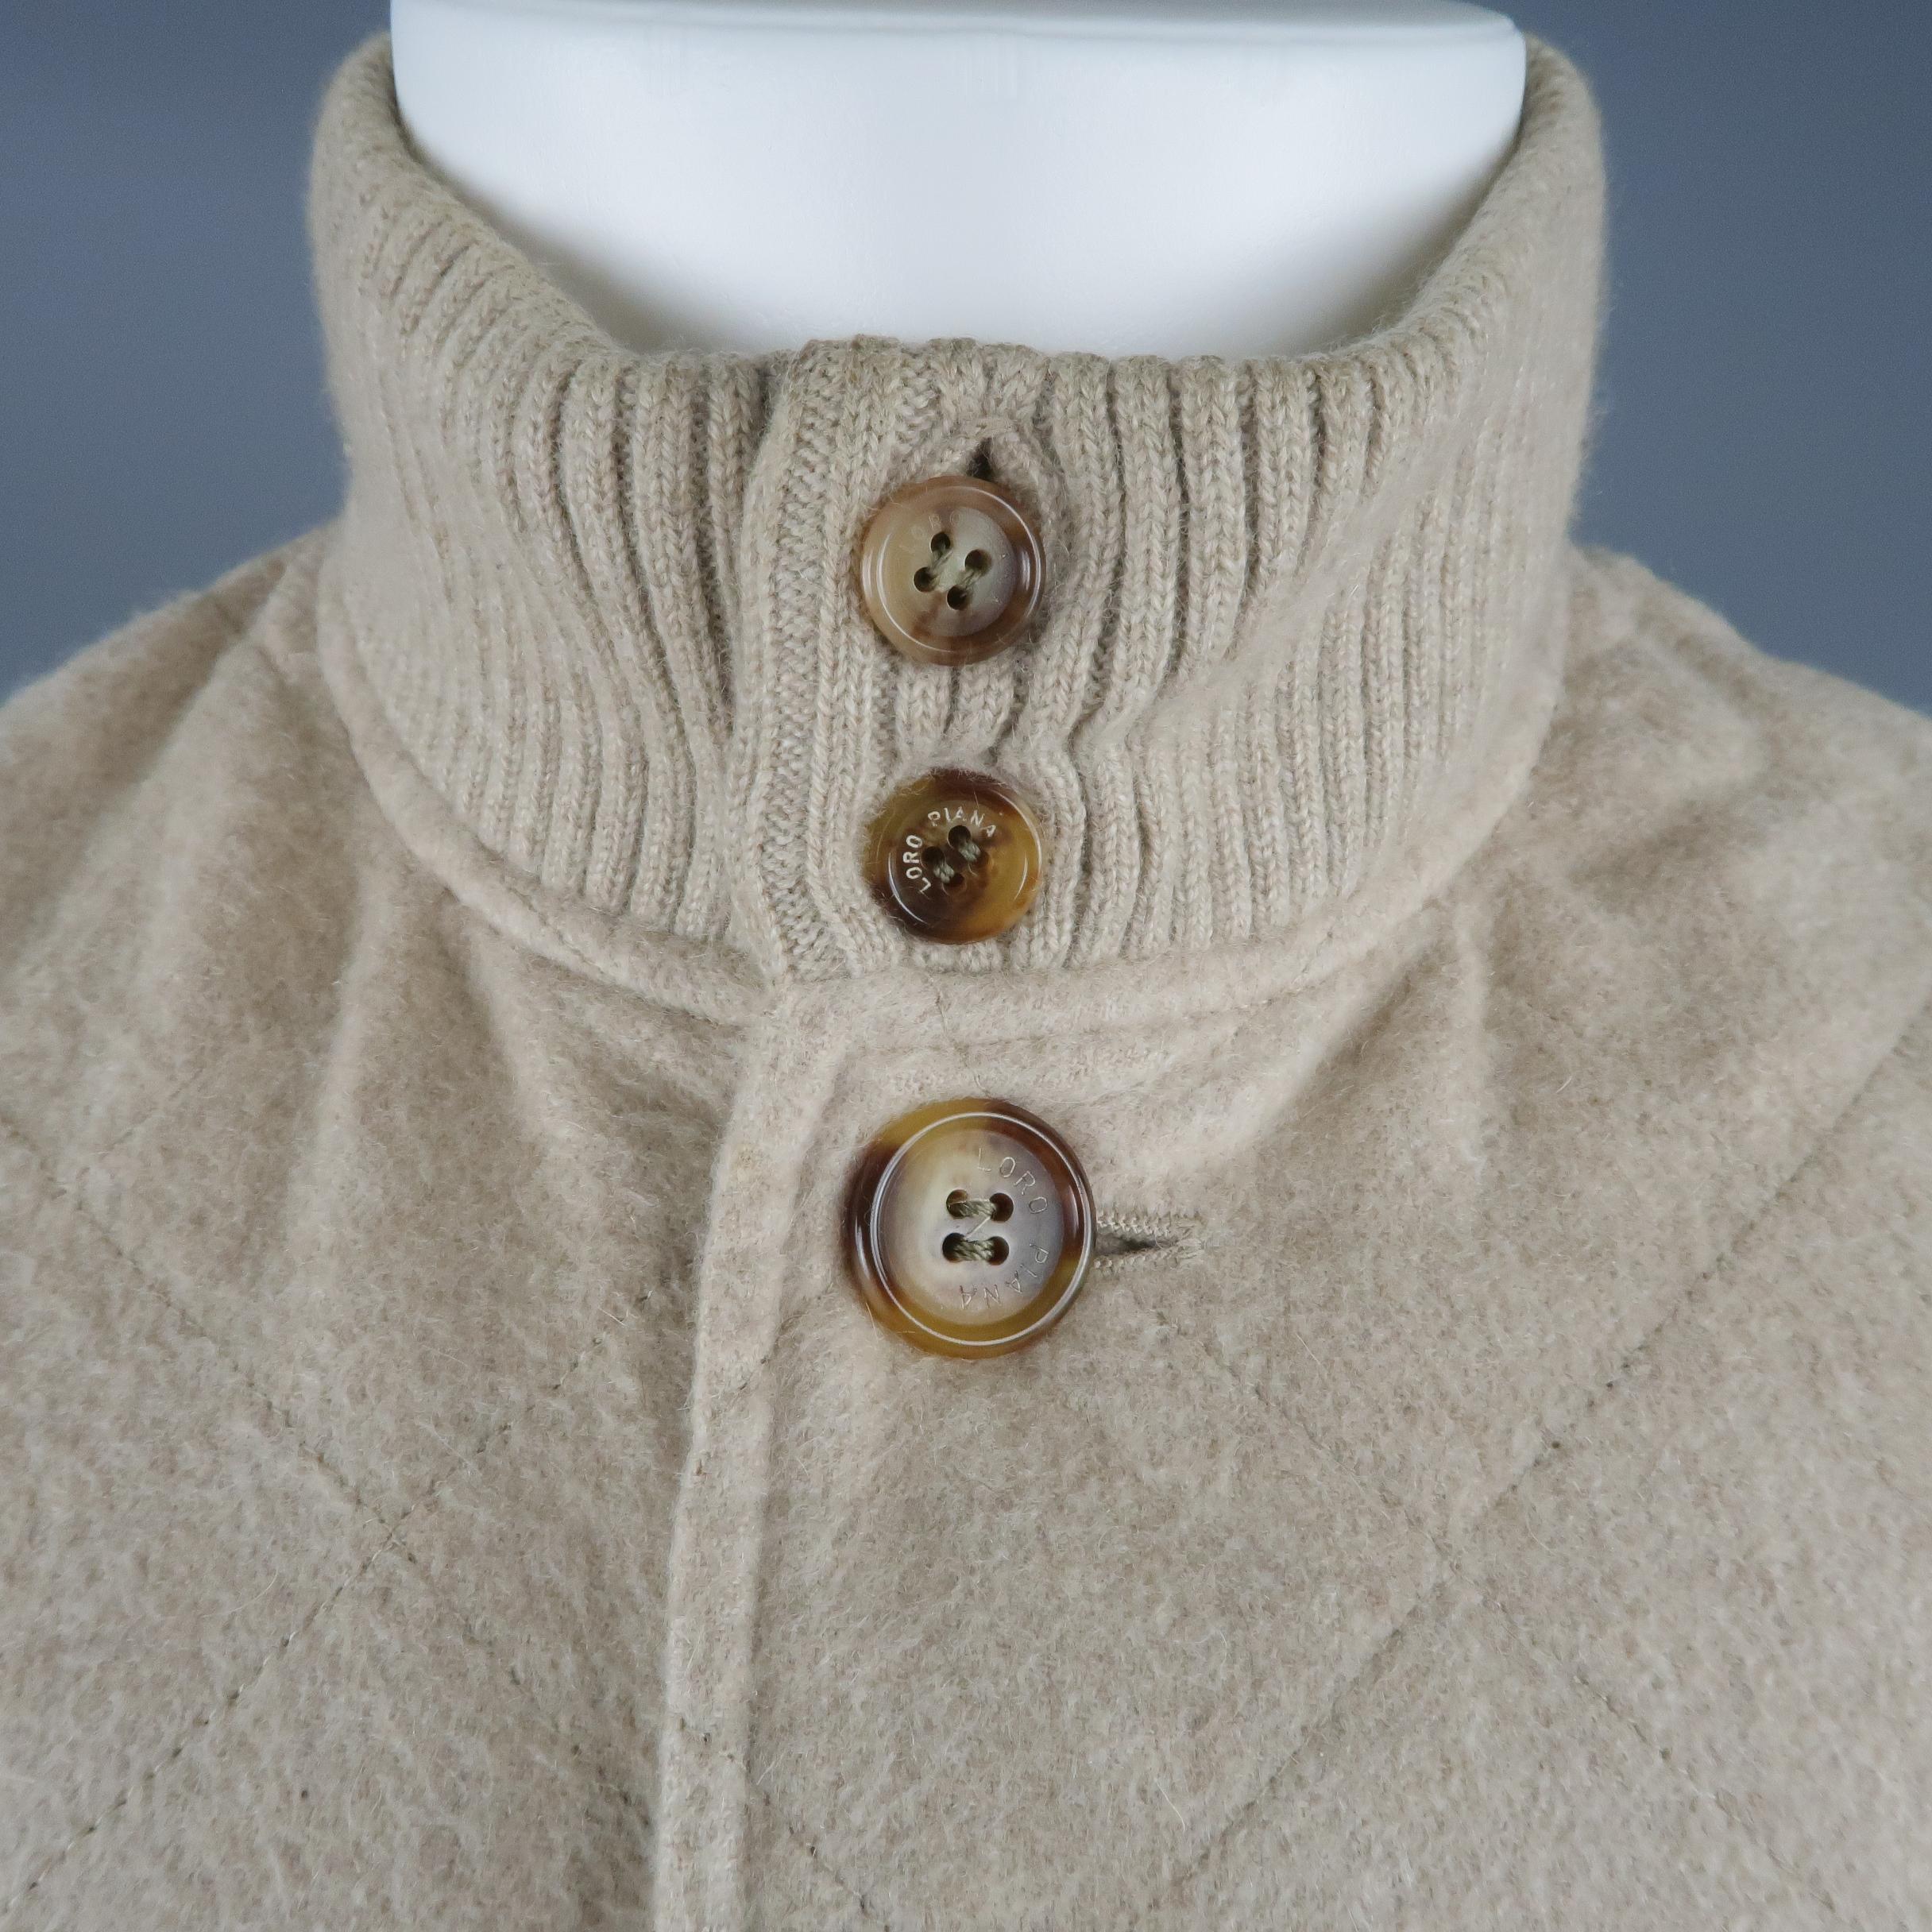 LORO PIANA vest comes in quilted oatmeal beige cashmere with a button up front, high ribbed collar and waist, and slanted pockets. Made in Italy.
 
Excellent Pre-Owned Condition. Retails: $ 2,595.00.
Marked: S
 
Measurements:
 
Shoulder: 18